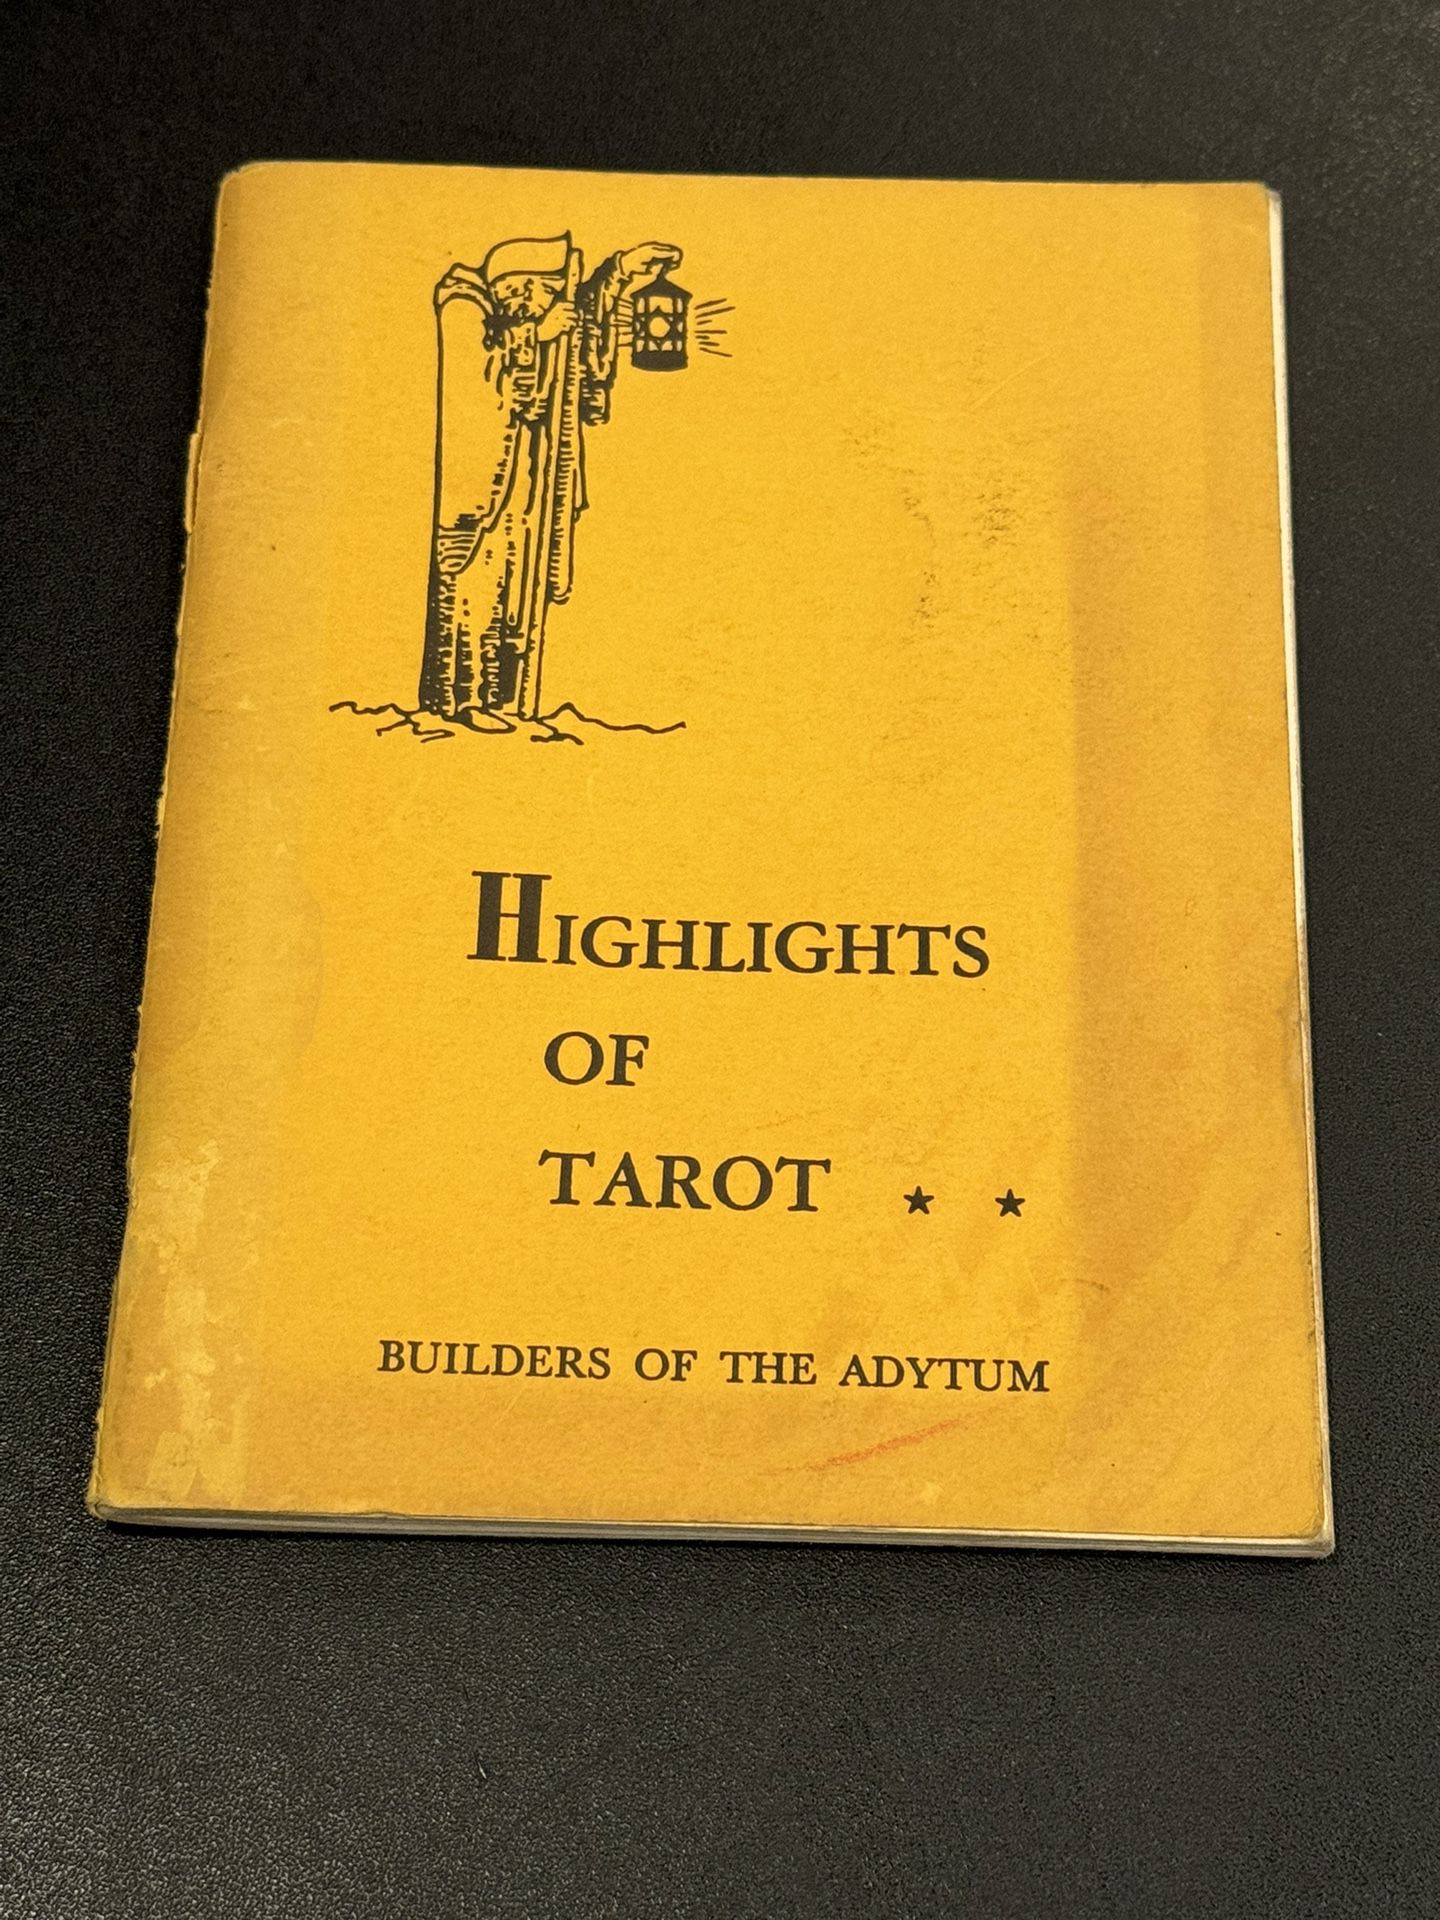 Highlights Of Tarot by Paul Foster Case Builders Of The Adytum Booklet